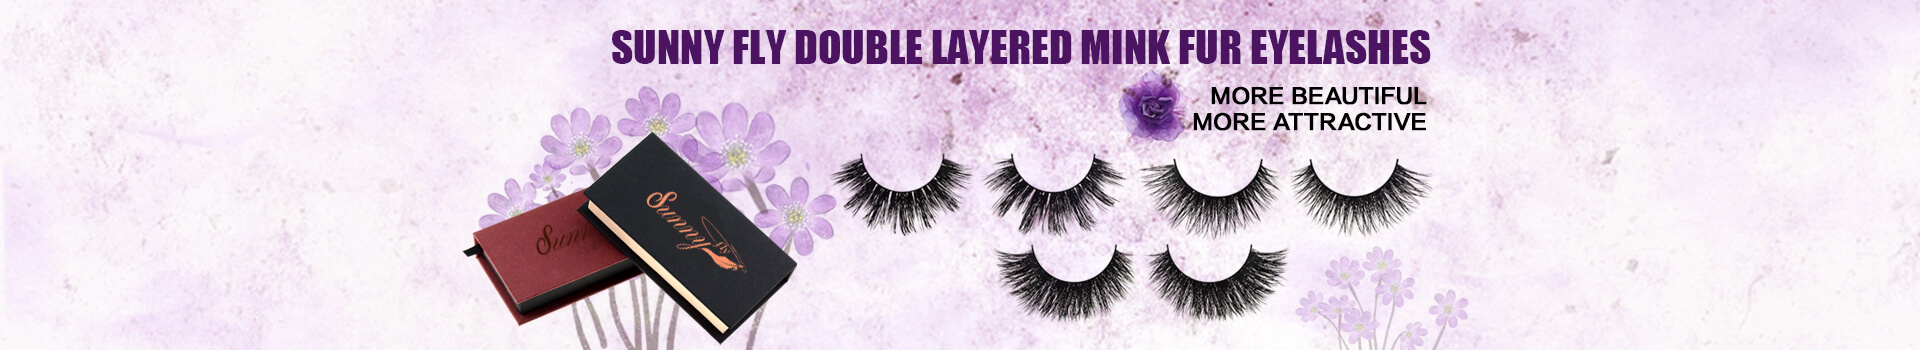 Double Layered Nerz Pelz Wimpern MD09